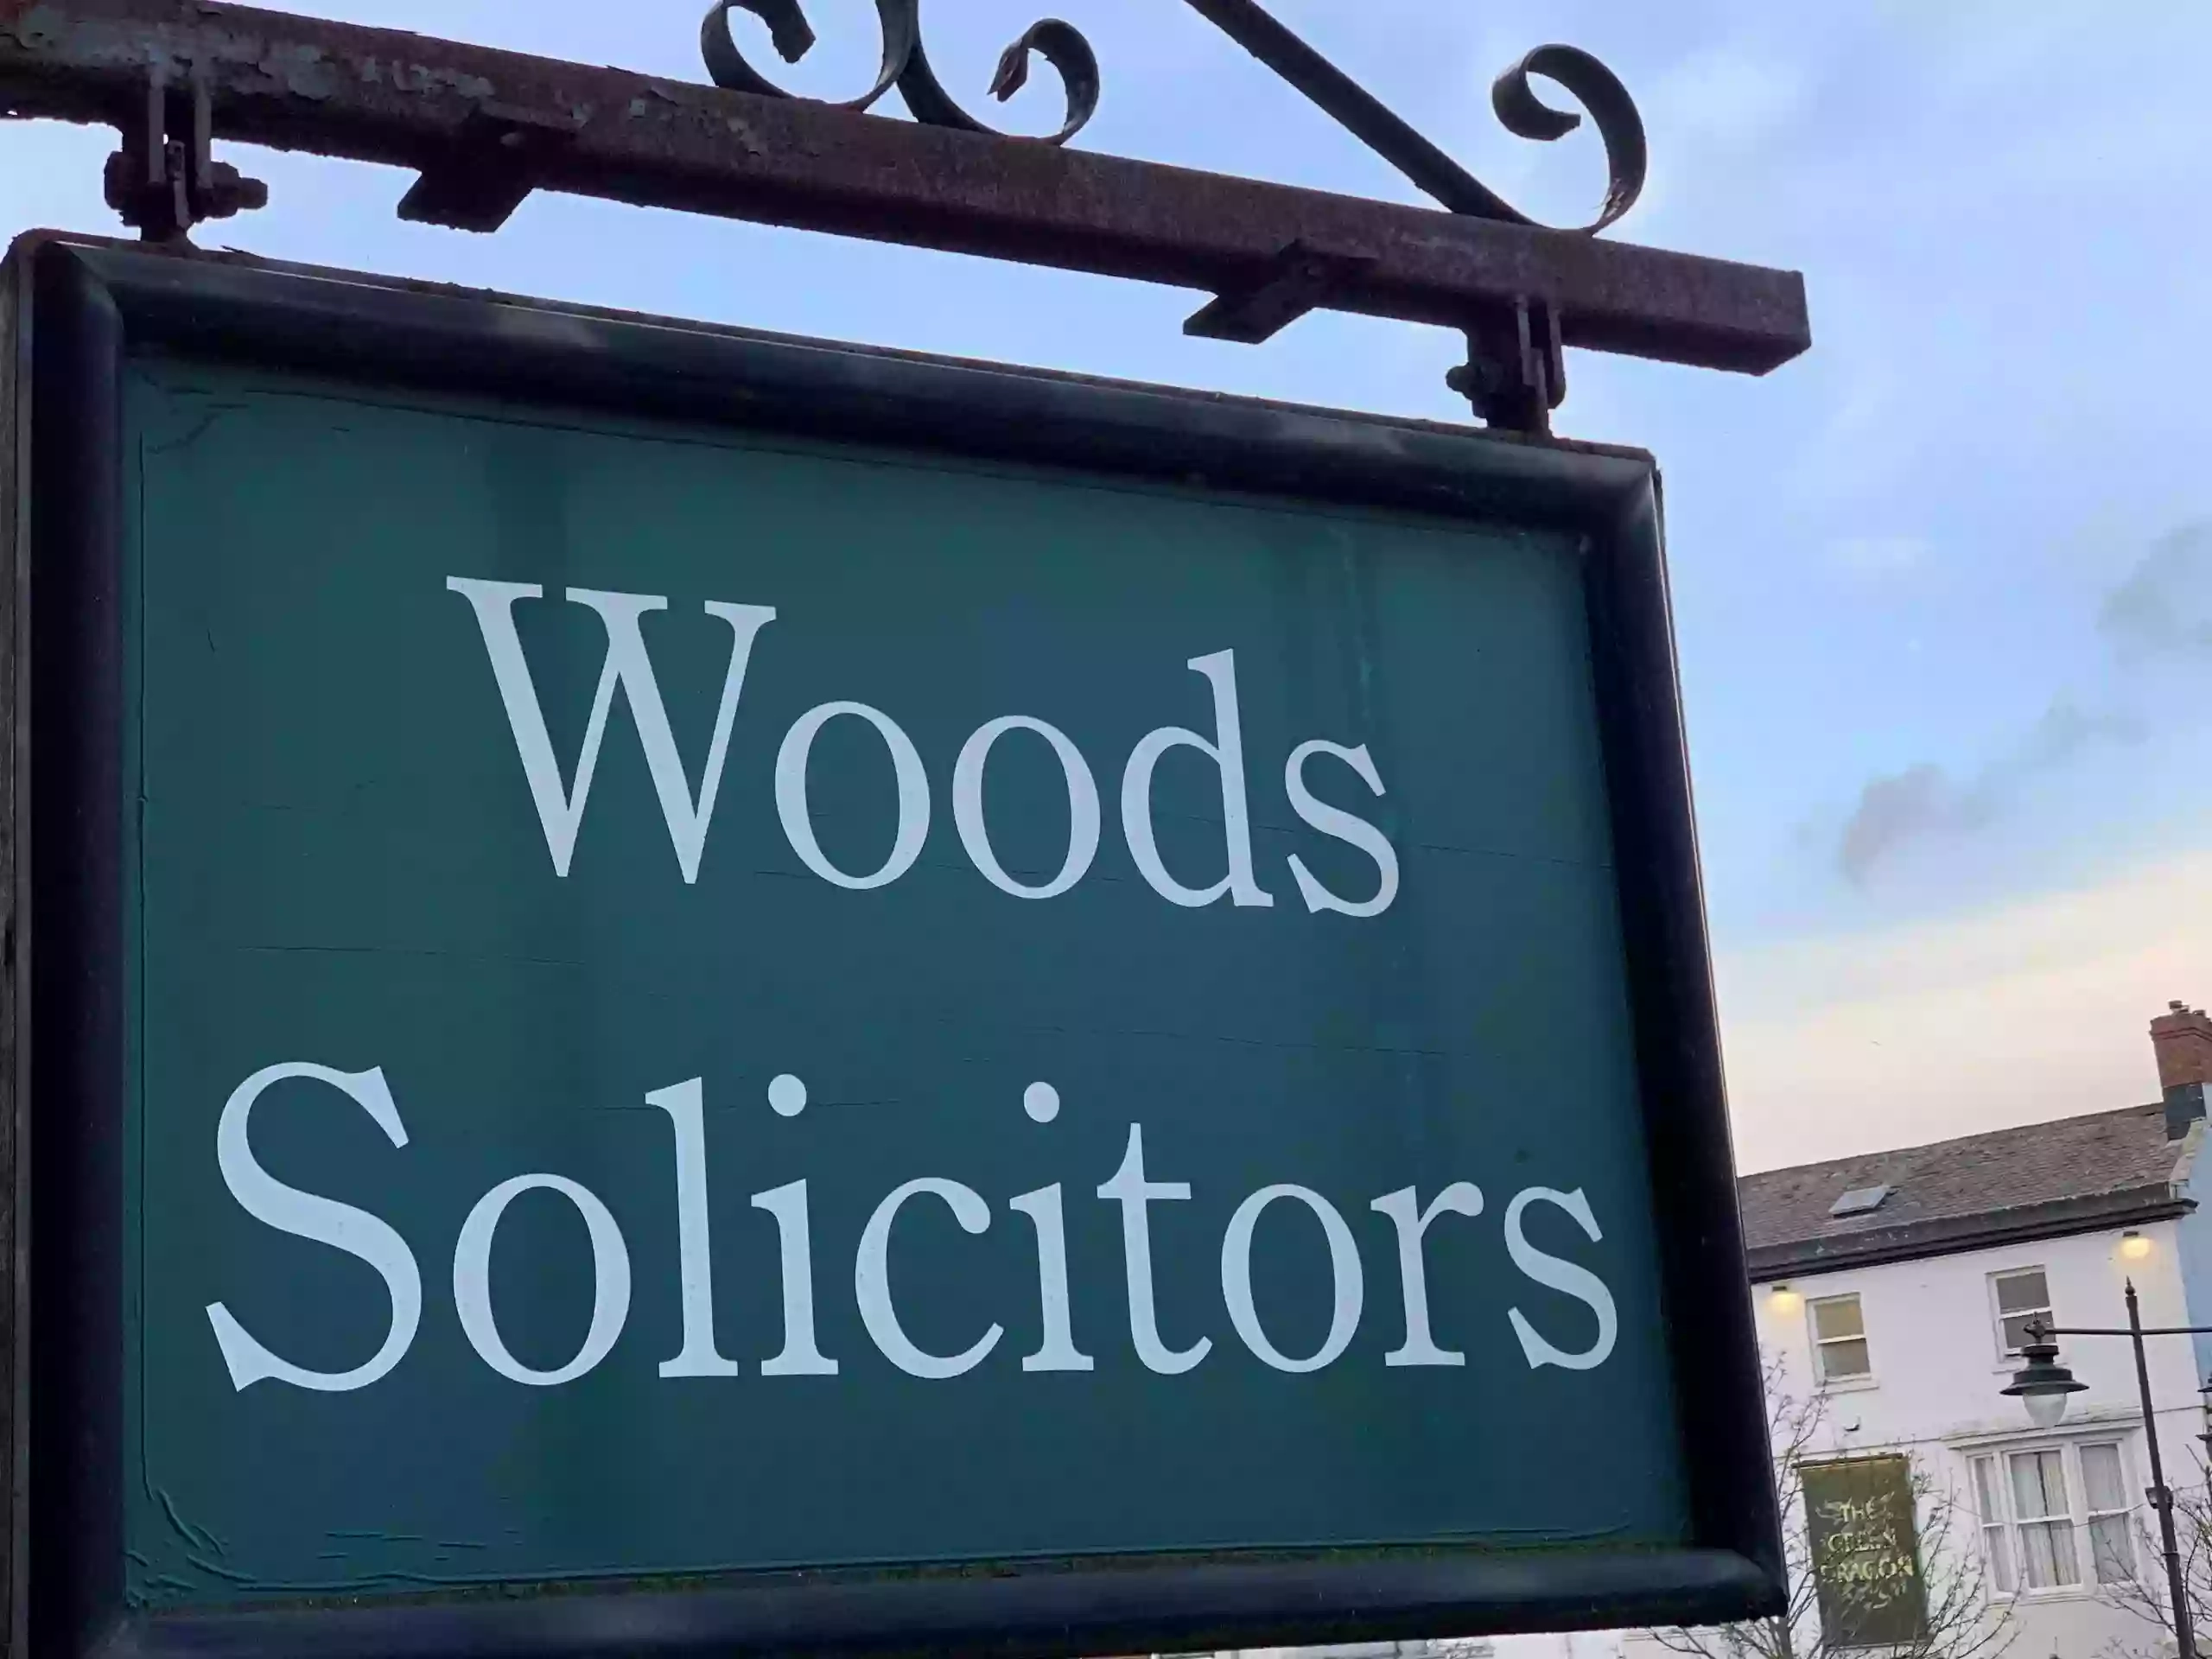 Woods Solicitors (West Yorkshire) LLP